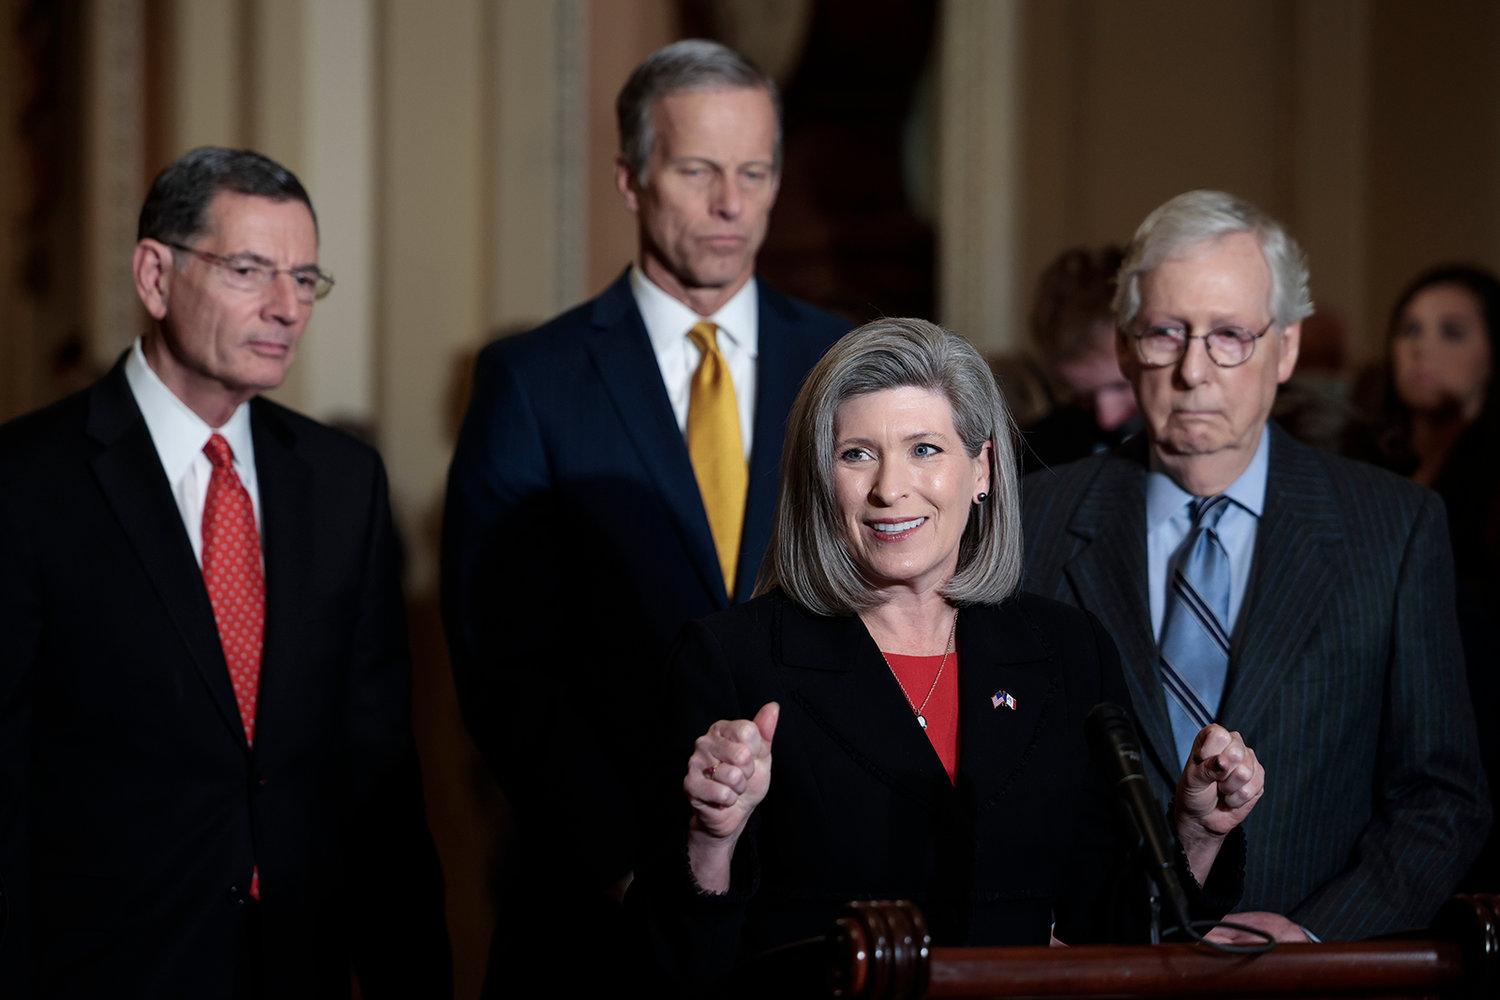 Sen. Joni Ernst (R-IA) speaks at a news conference after a weekly Republican policy luncheon at the U.S. Capitol on Dec. 7, 2021, in Washington, DC. (Anna Moneymaker/Getty Images/TNS)